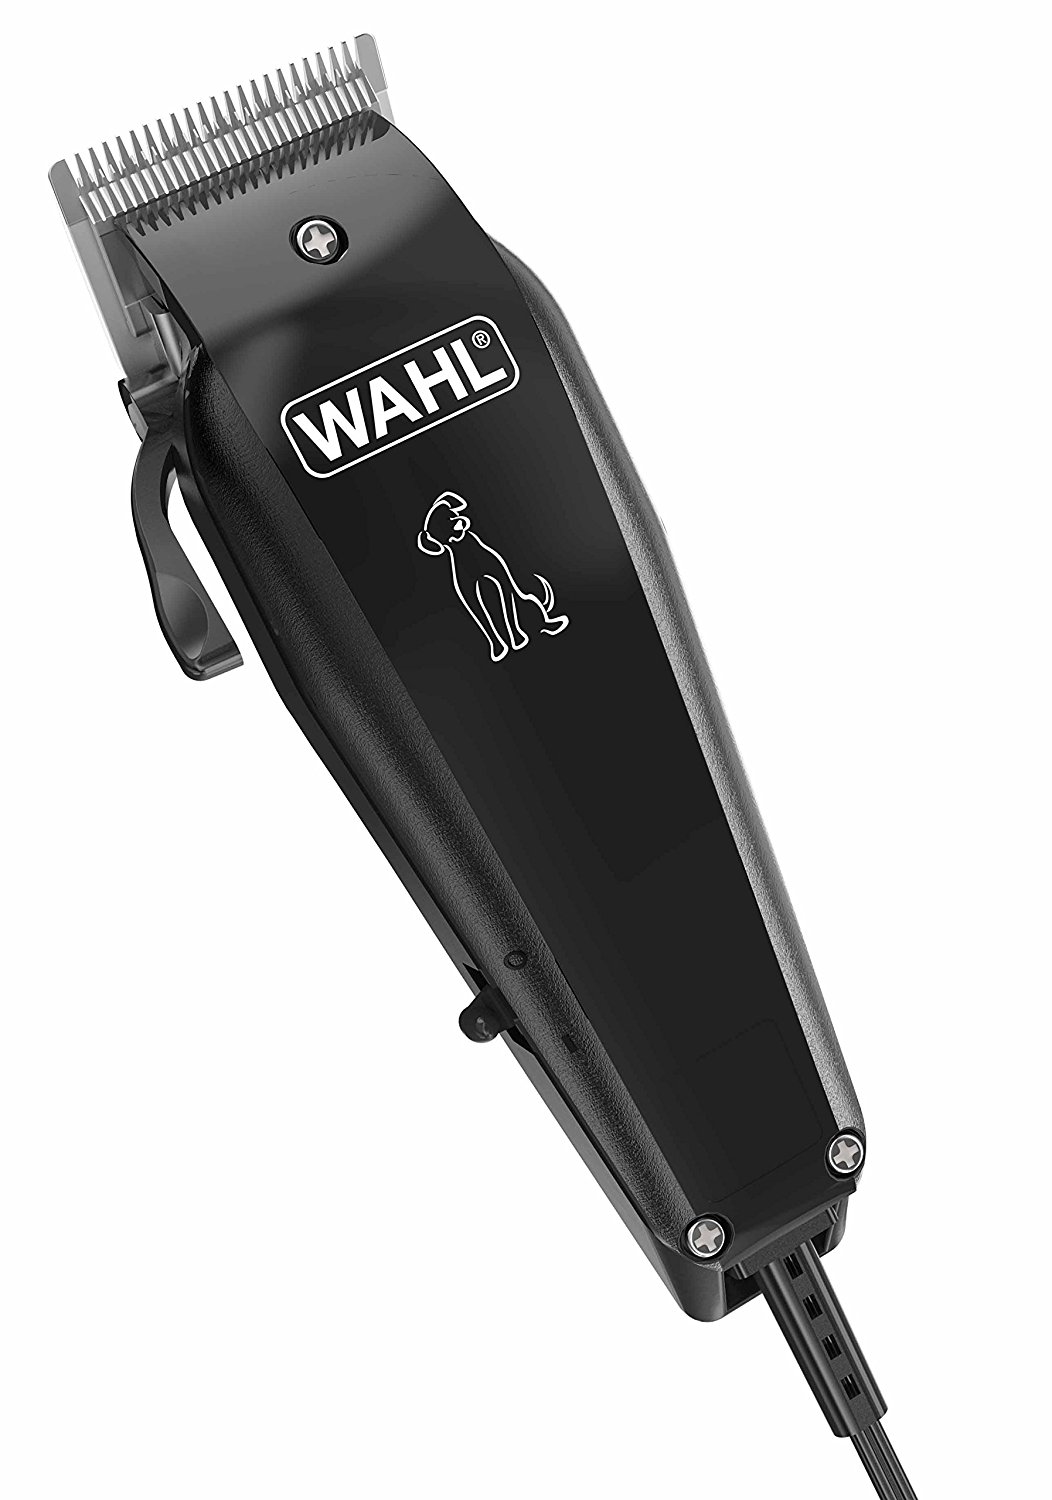 Great Wahl Dog Grooming Clipper in the world Learn more here 